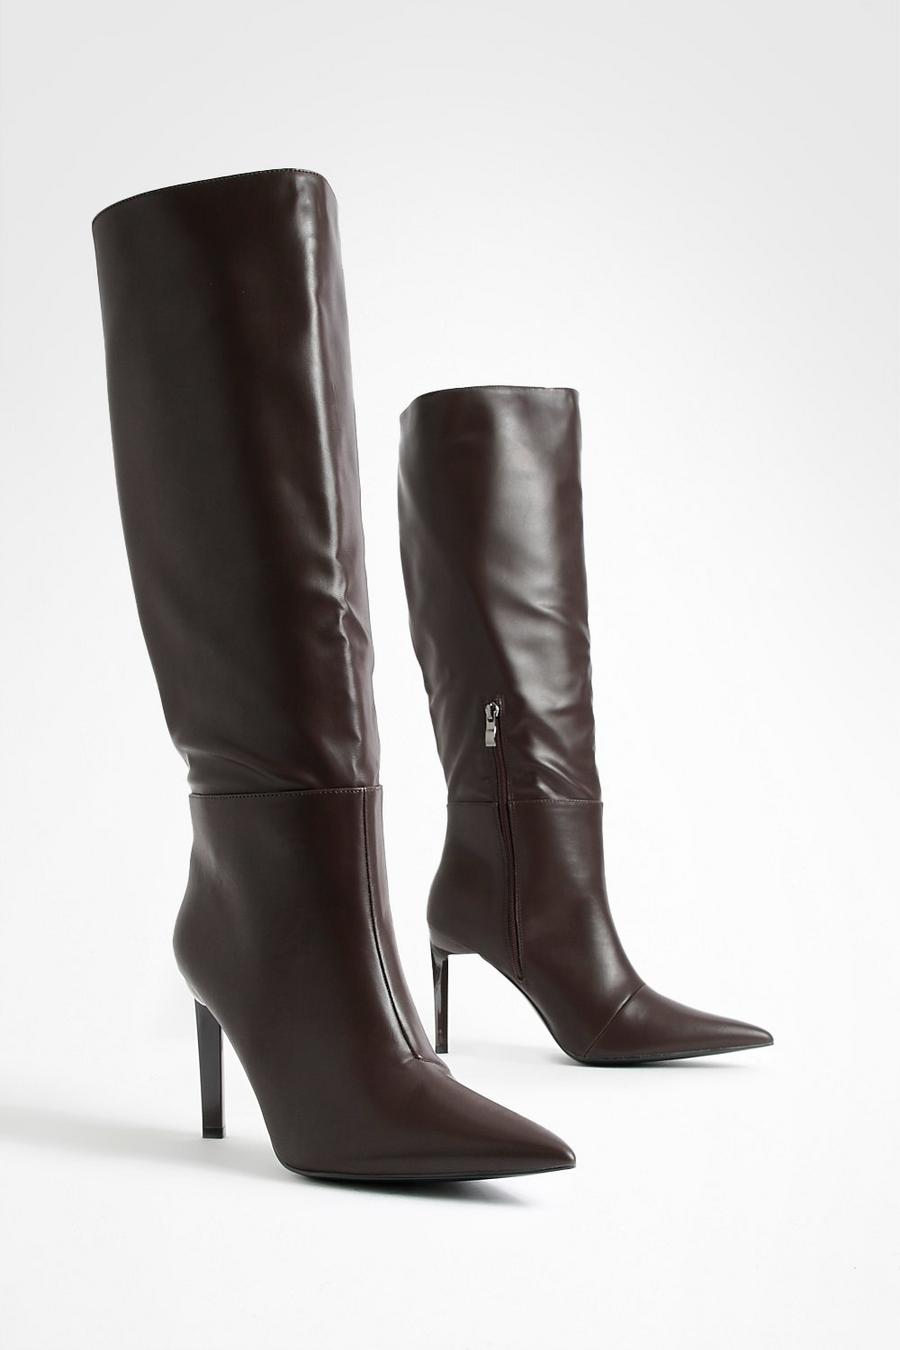 Chocolate brown Wide Fit Stiletto Mid Height Knee High Boots   